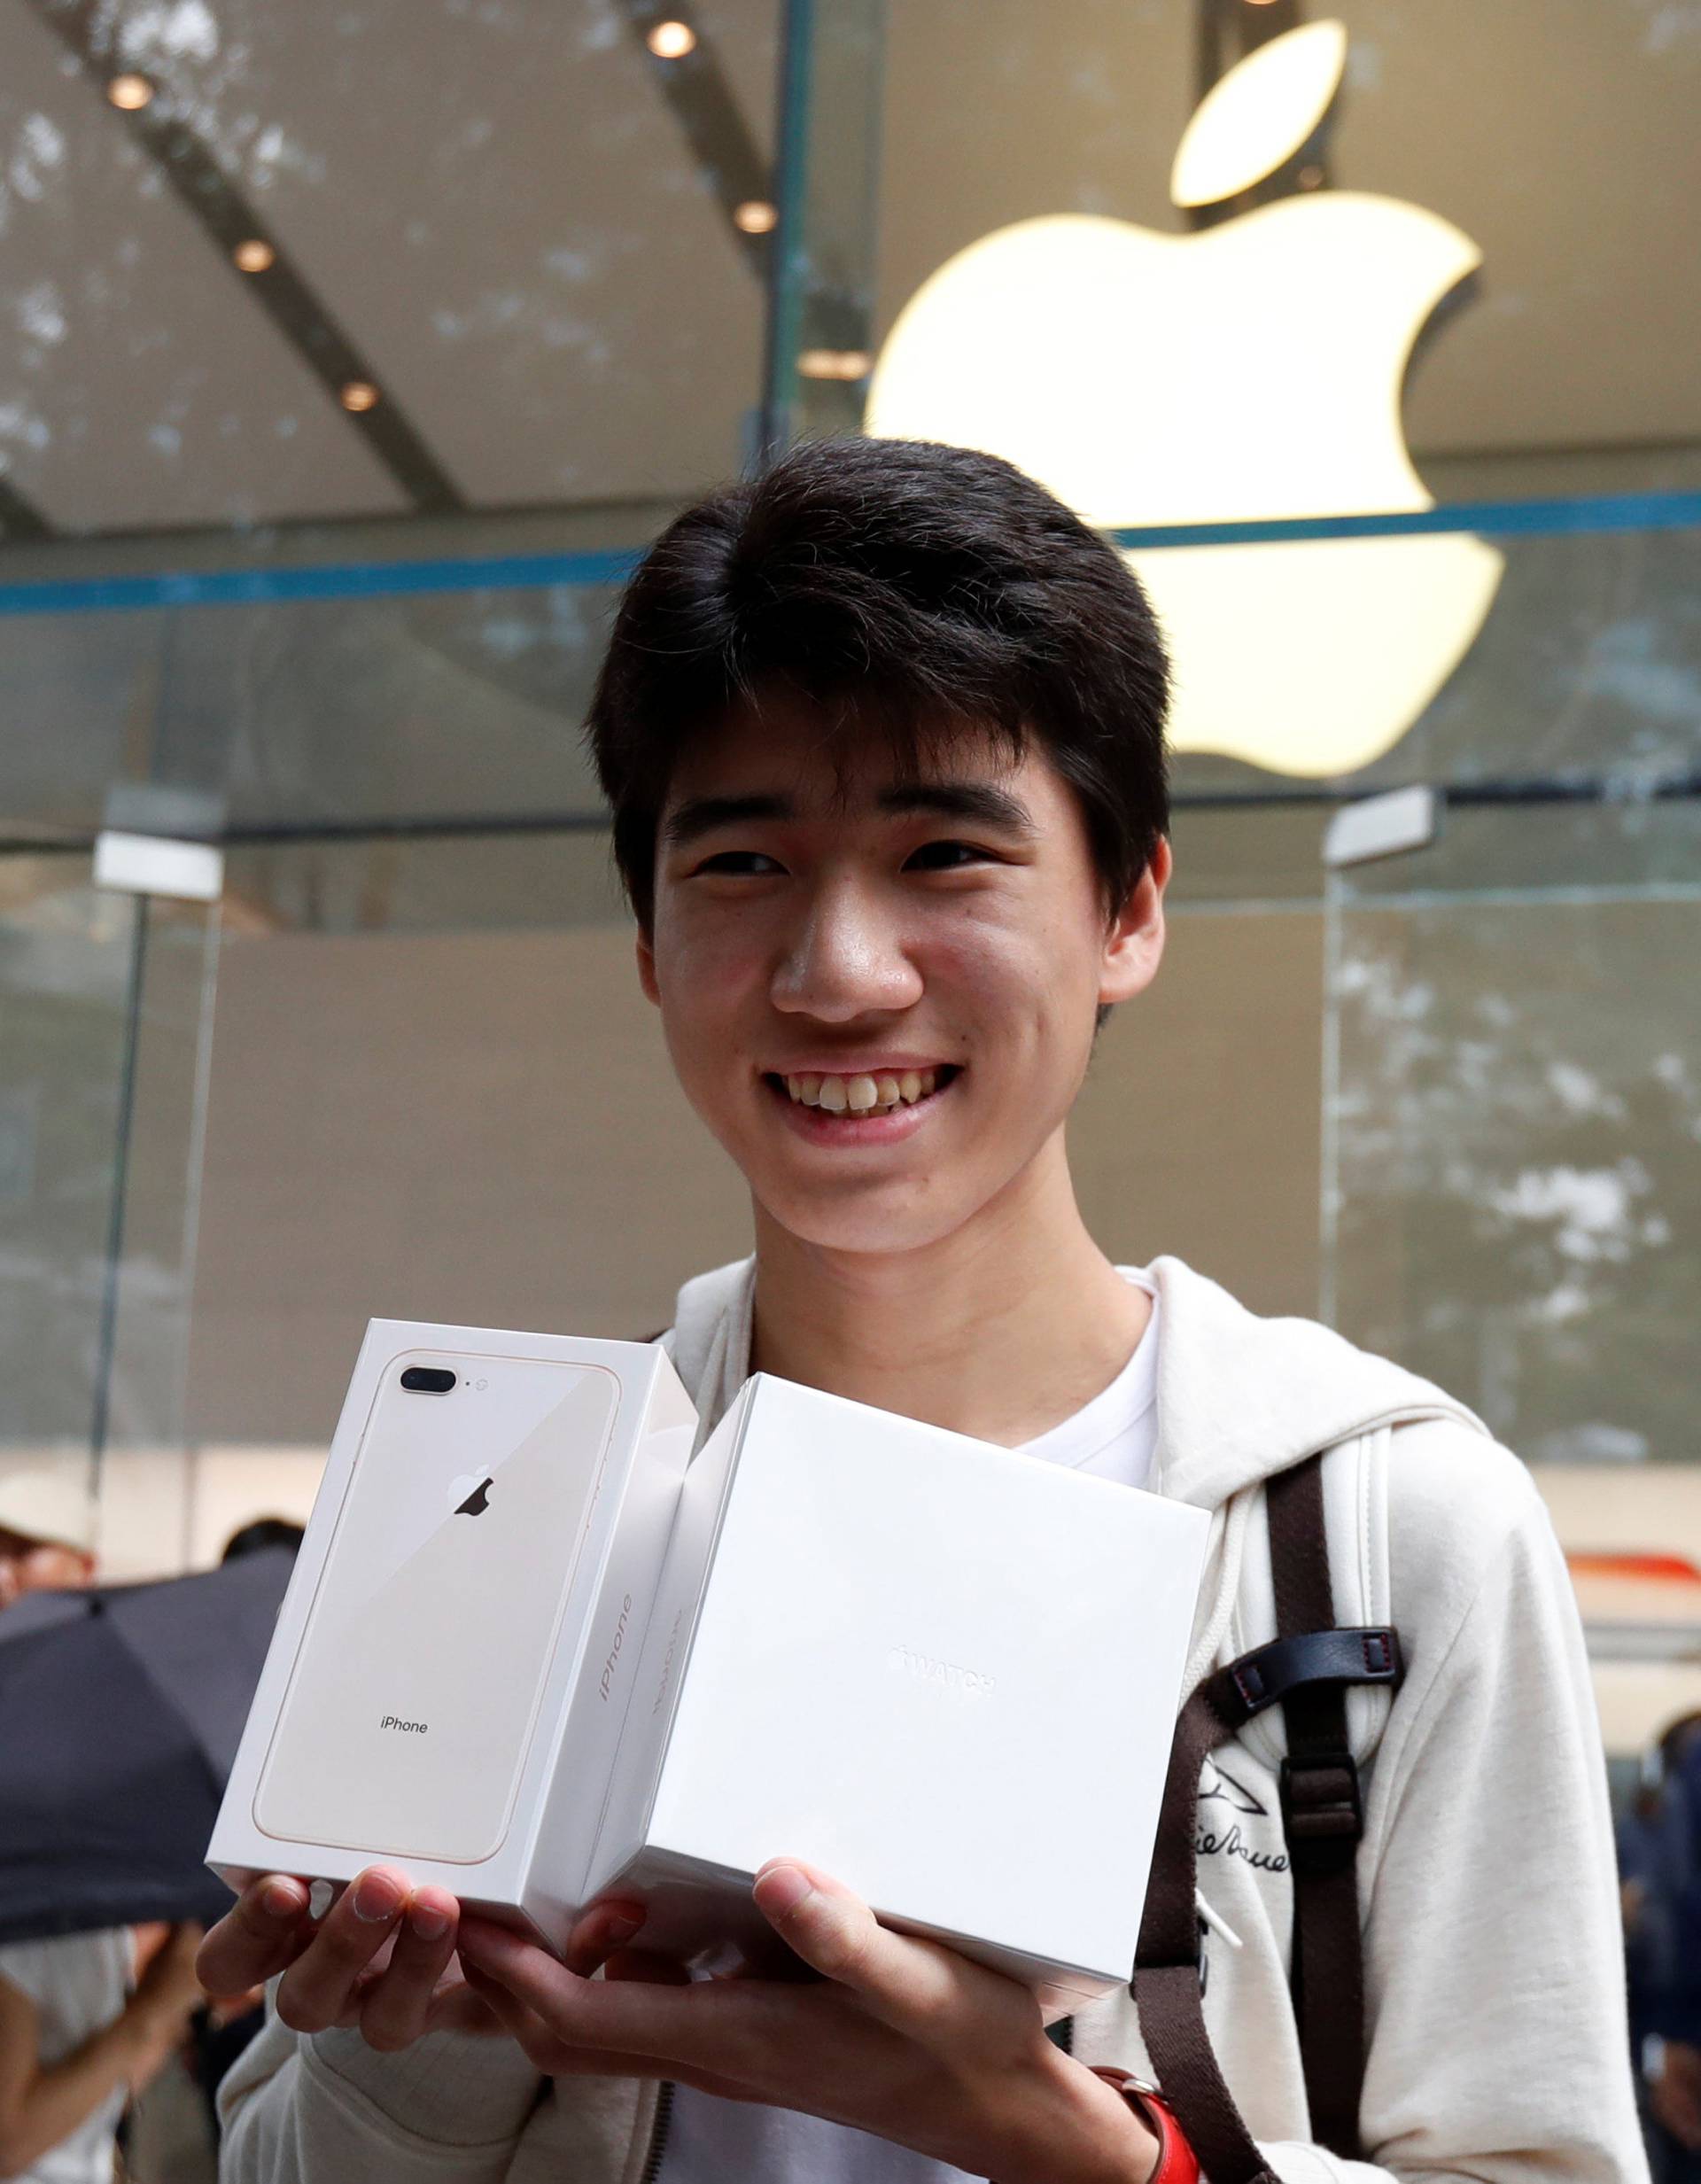 Yokoyama holds Apple's new iPhone 8 Plus and new Apple Watch after purchasing them at the Apple Store in Tokyo's Omotesando shopping district